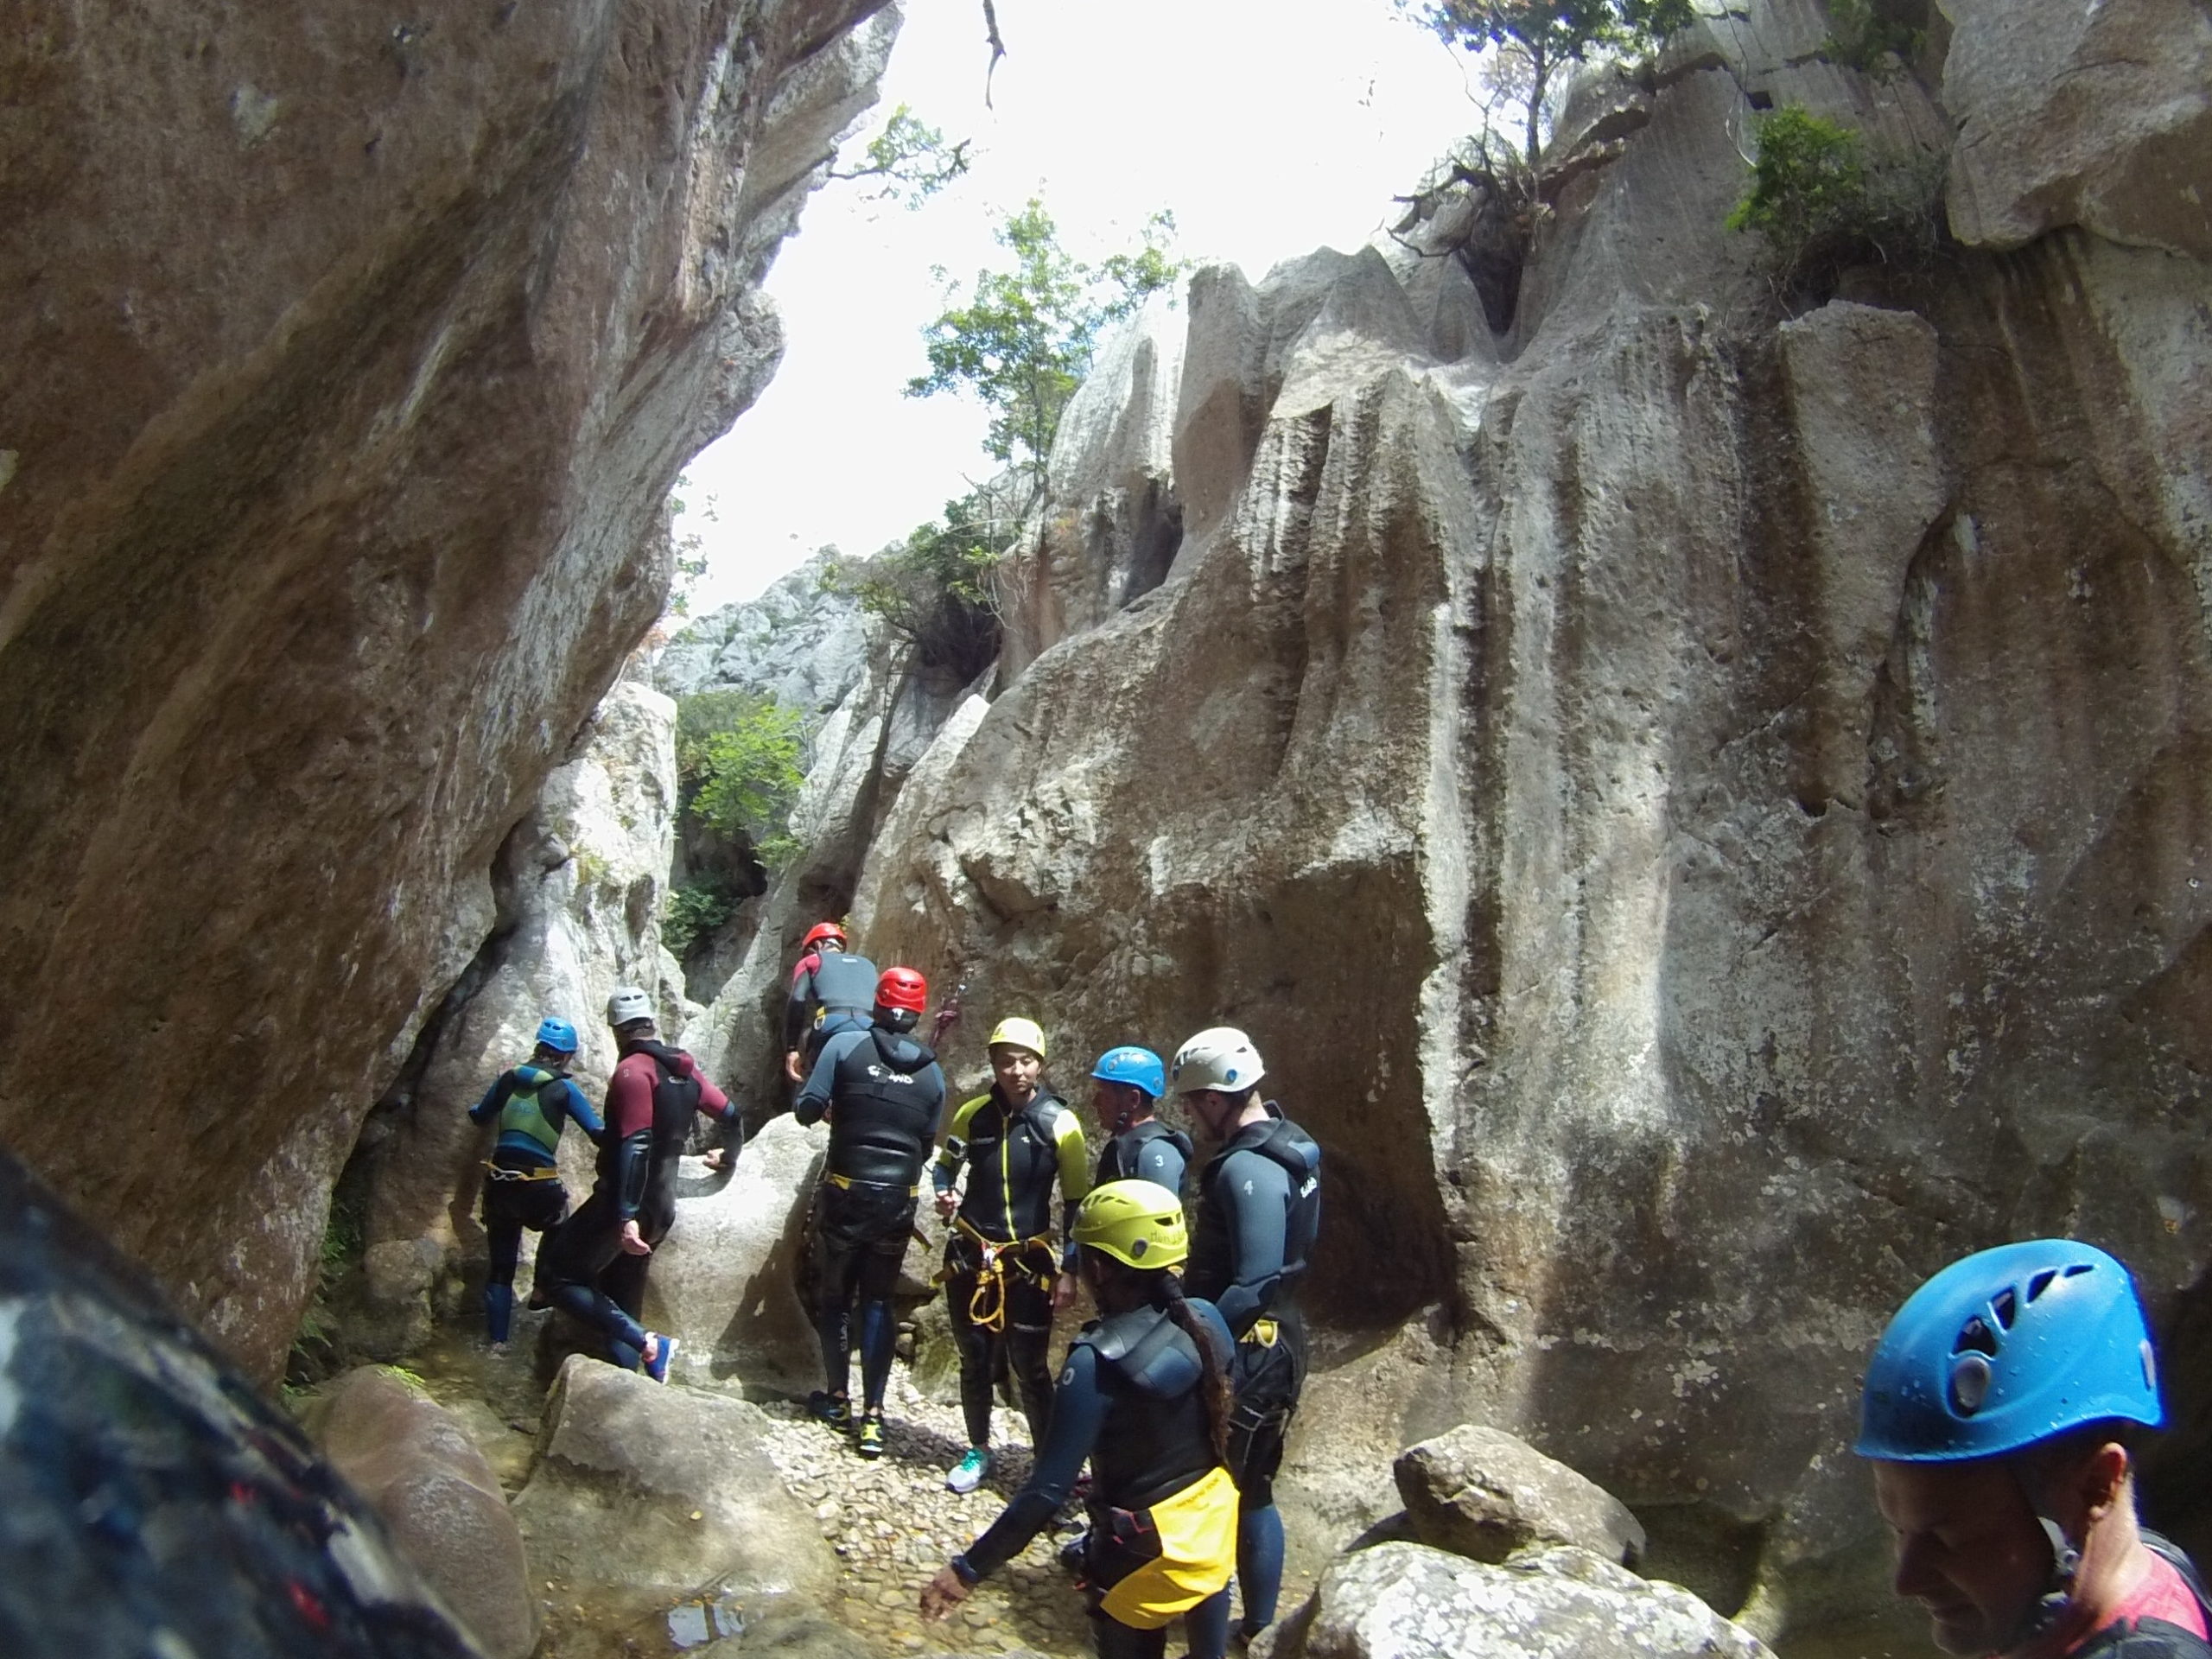 Group of people outside a cave in Majorca